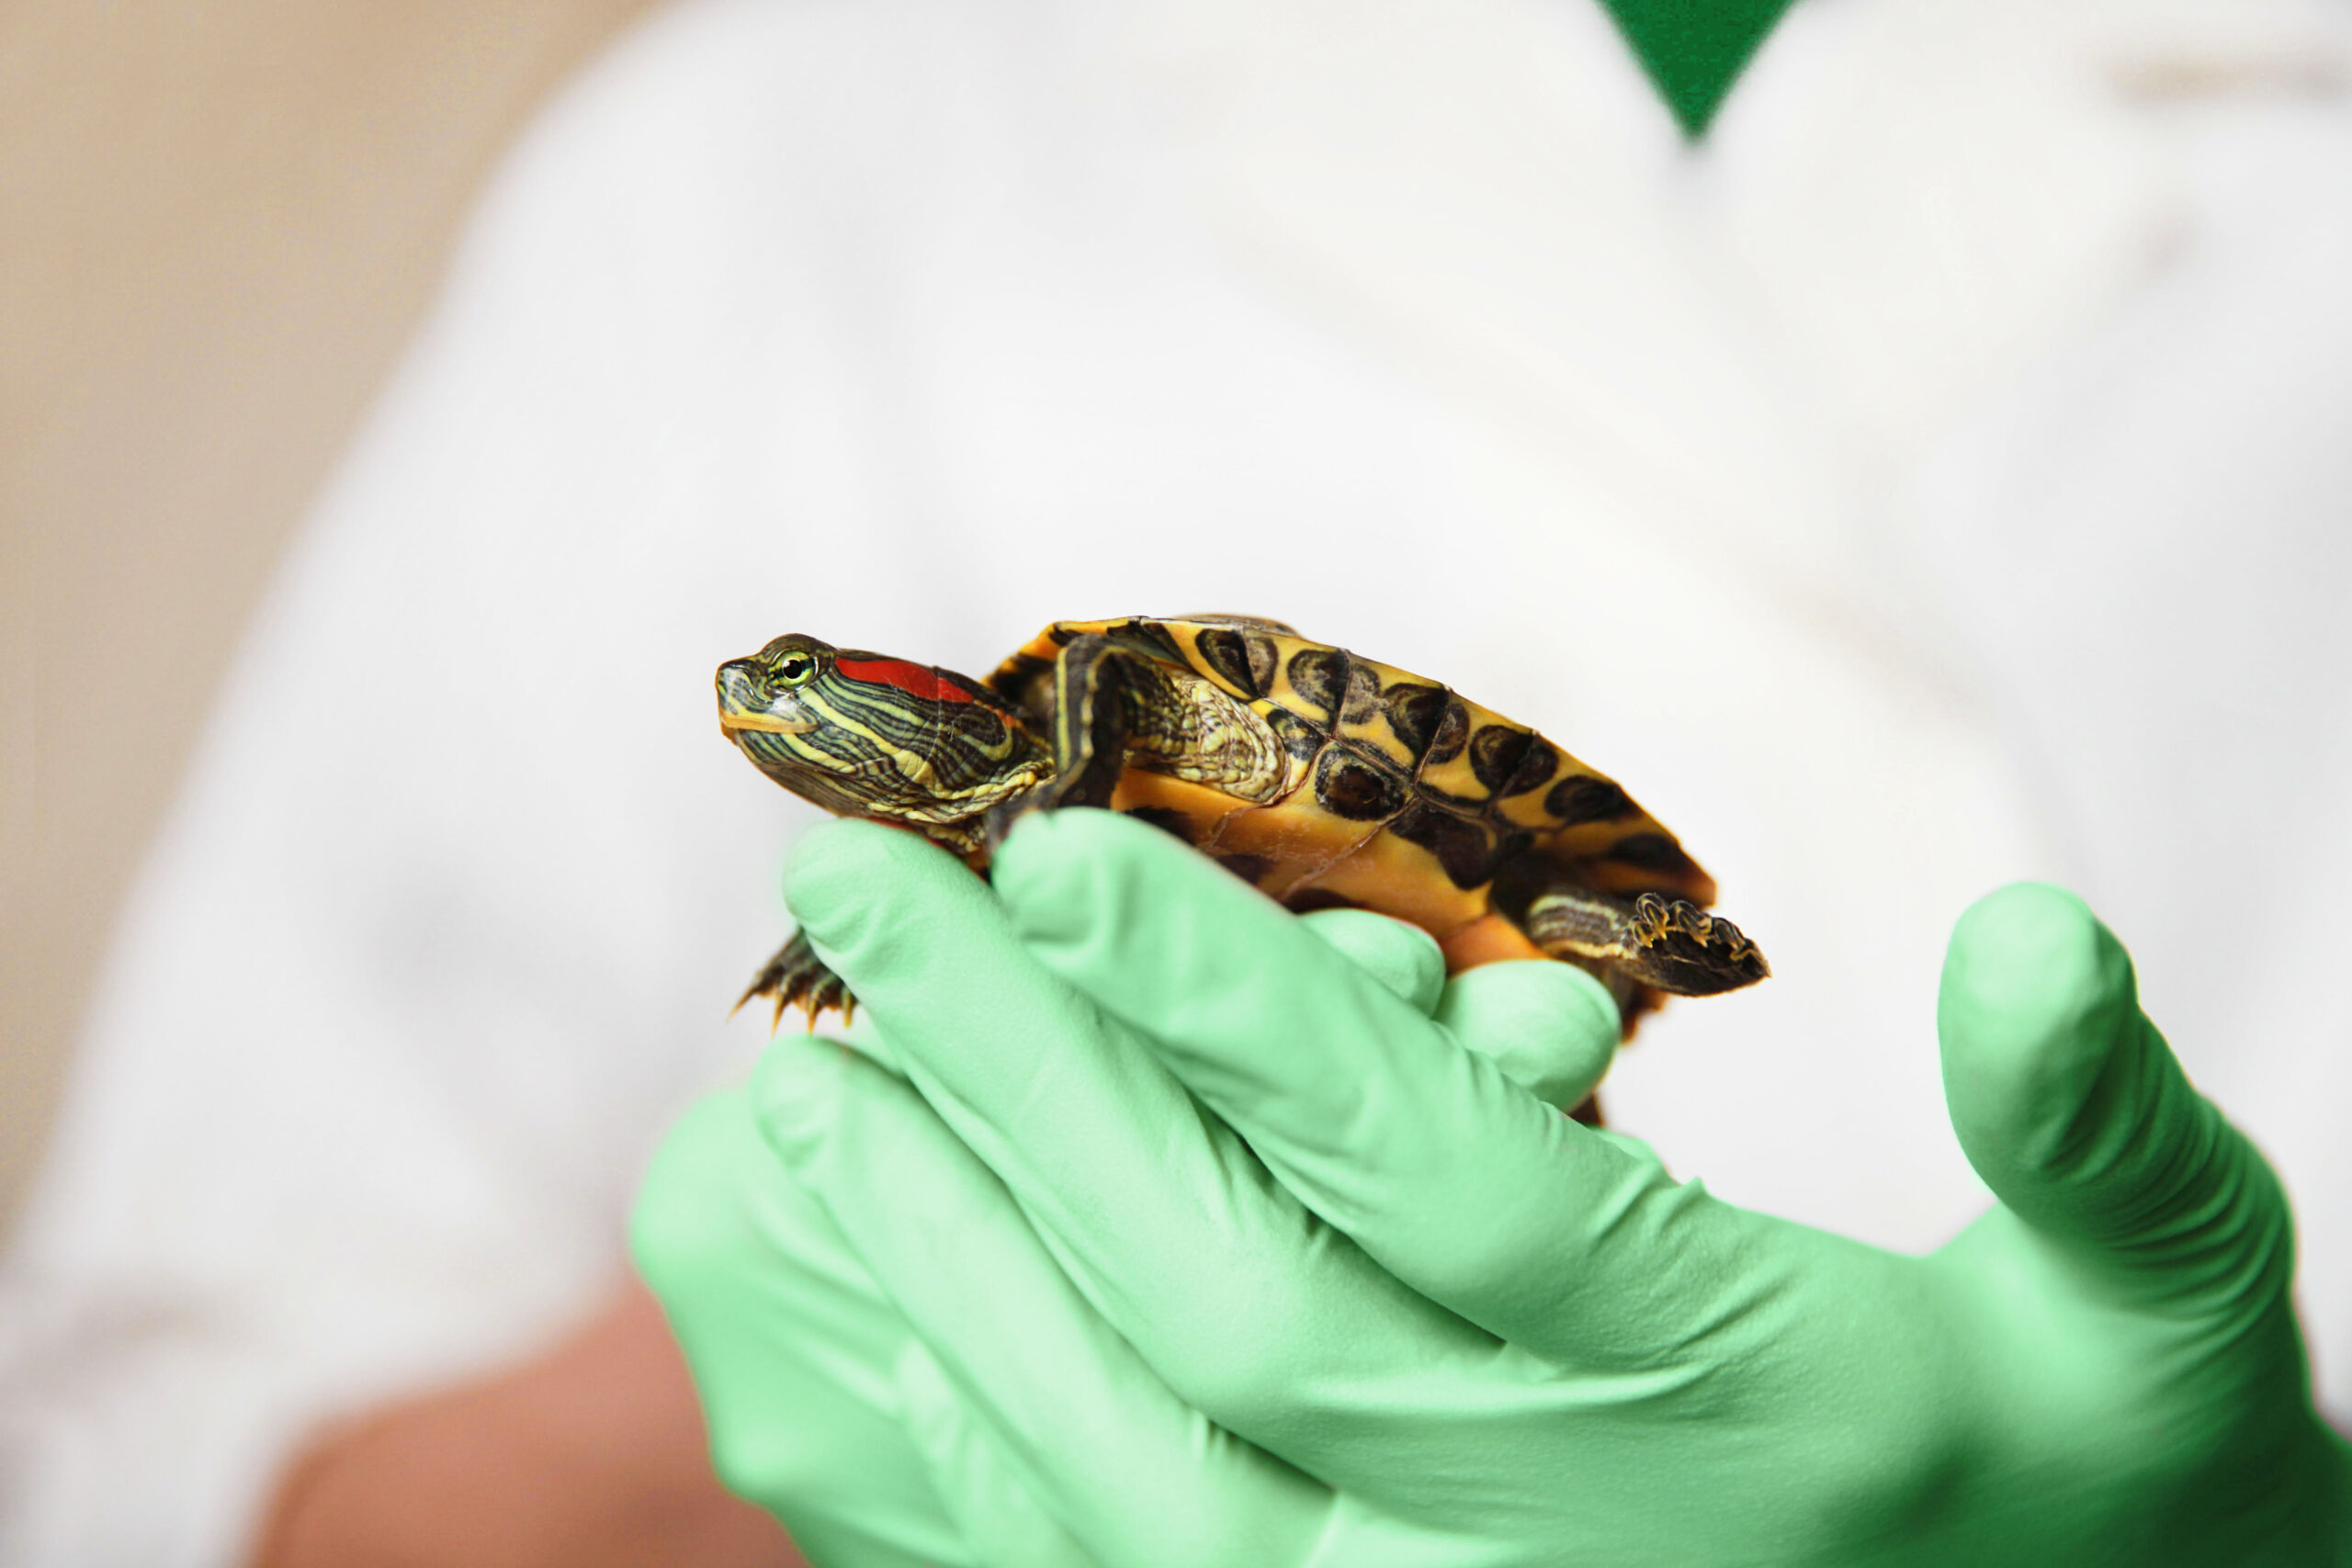 A veterinarian in a white coat examines a small turtle